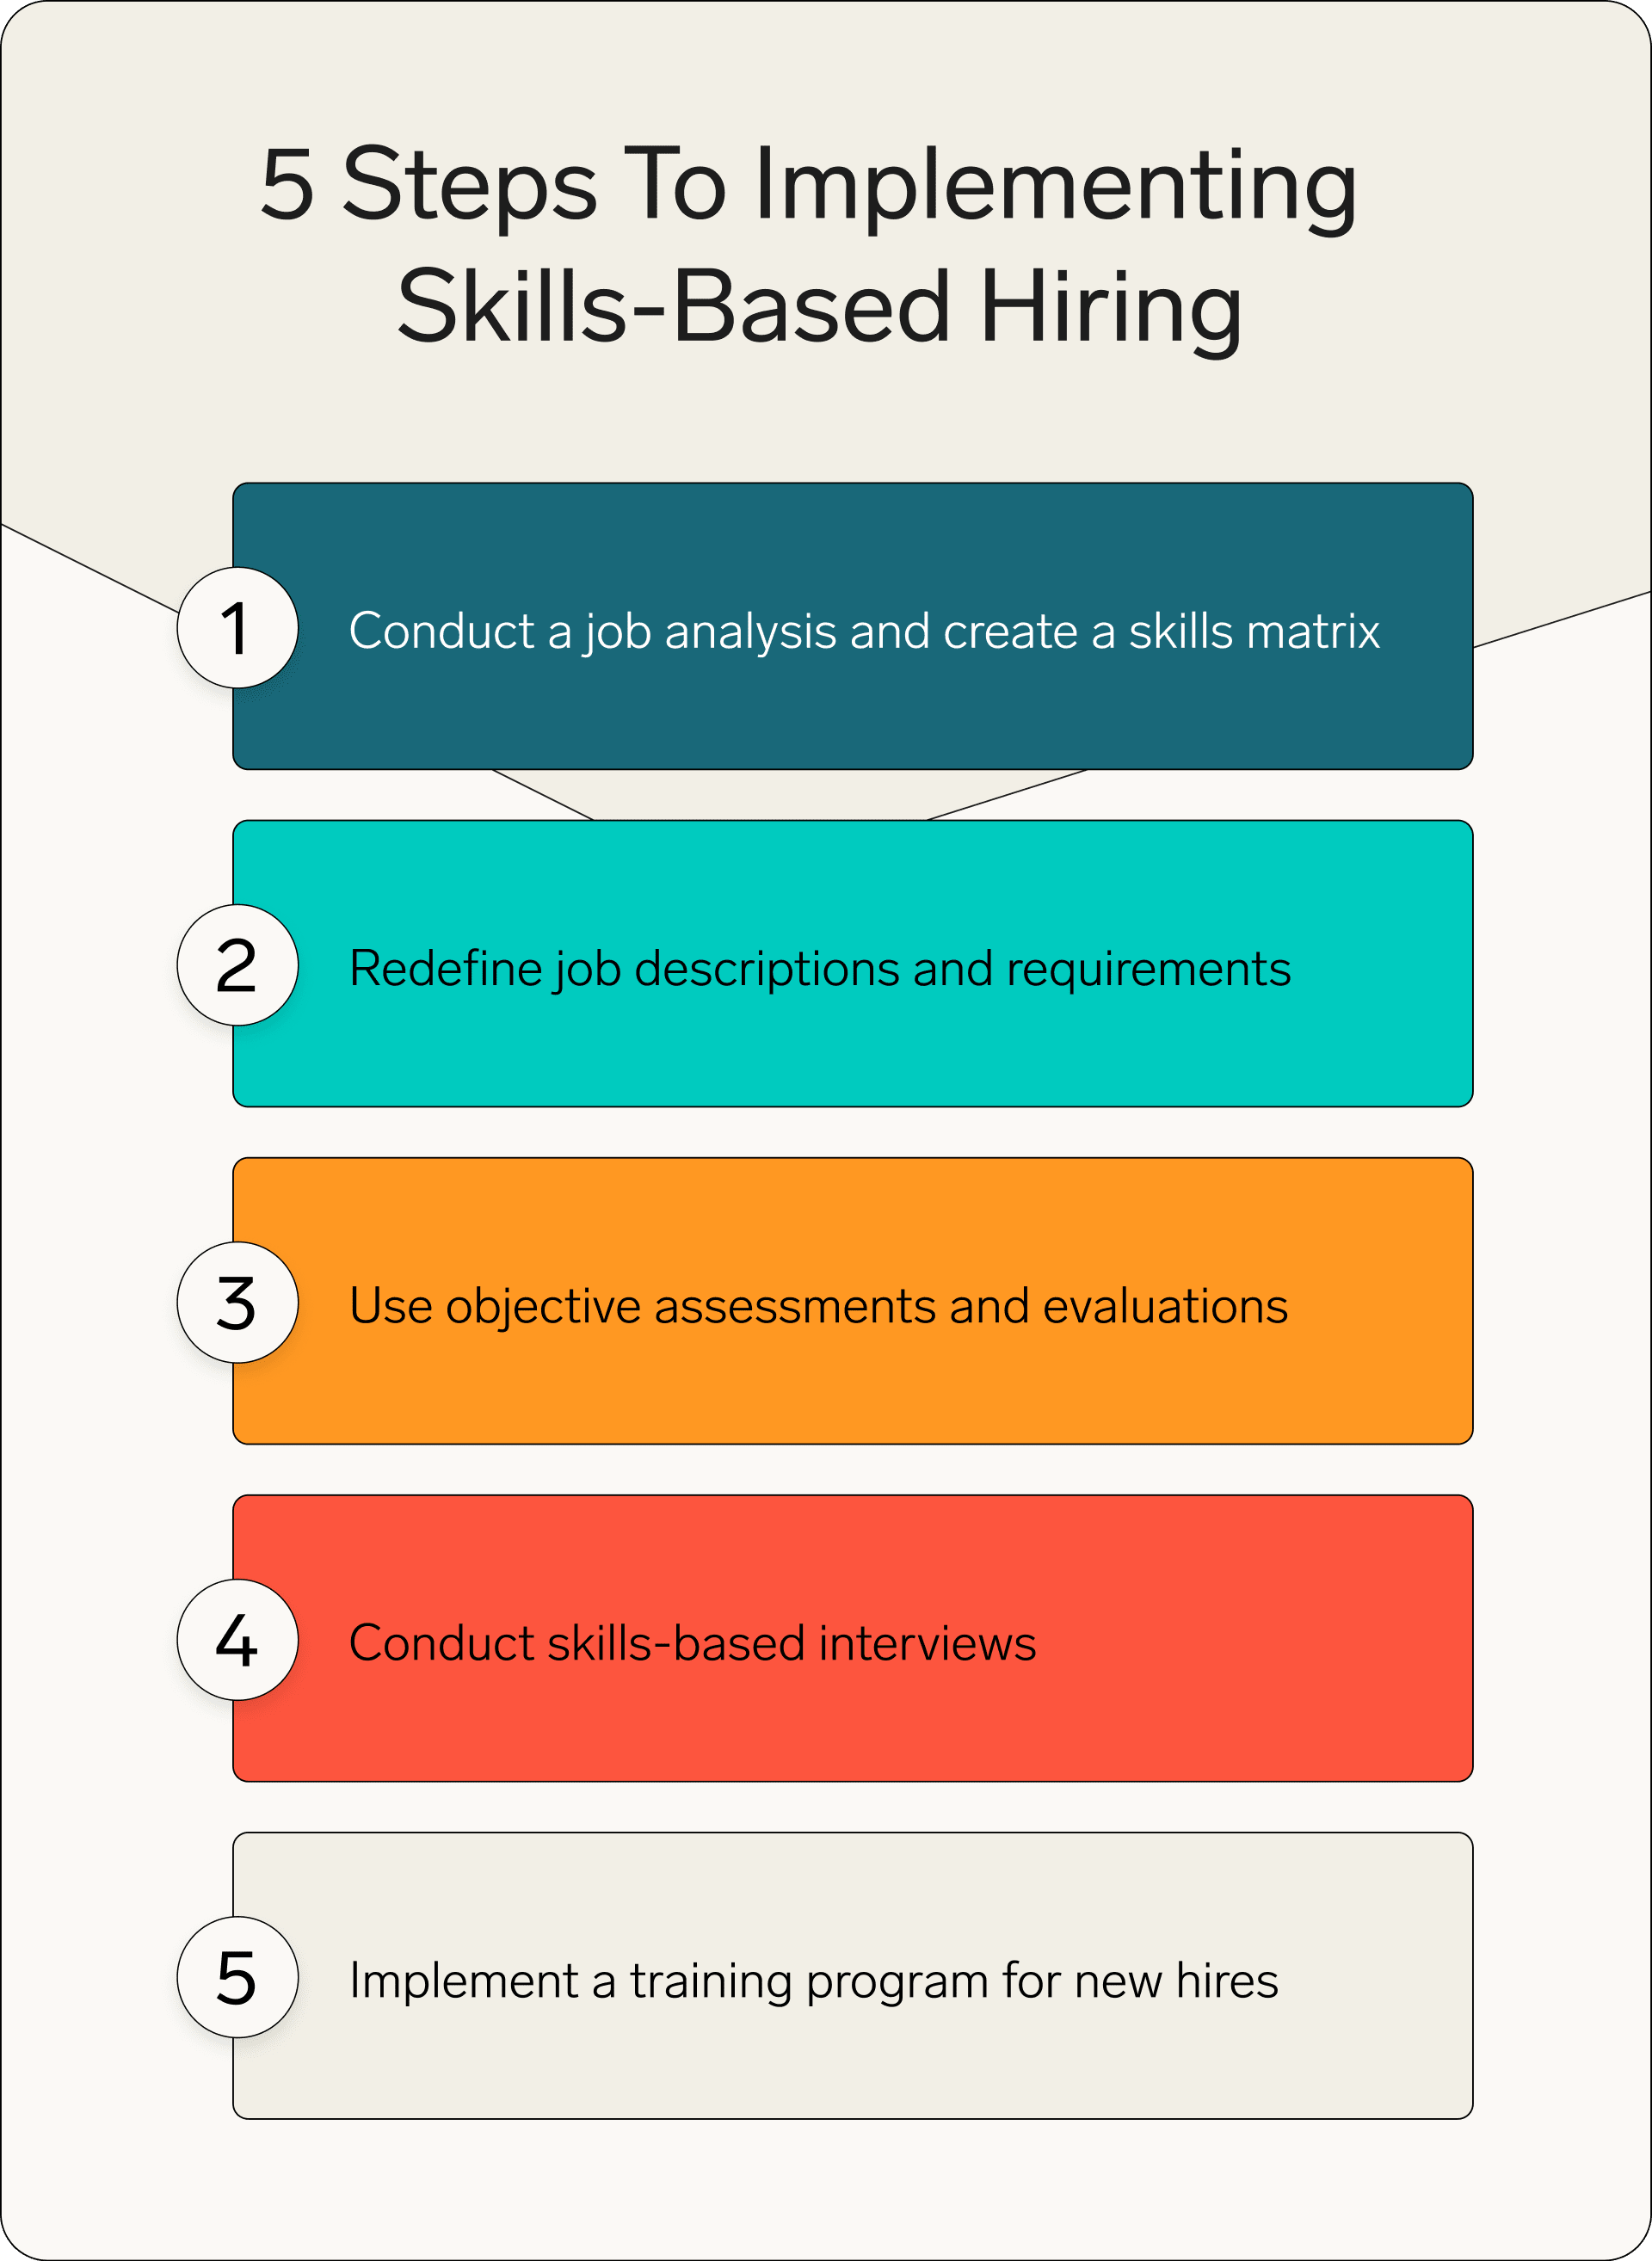 how to implement skills-based hiring